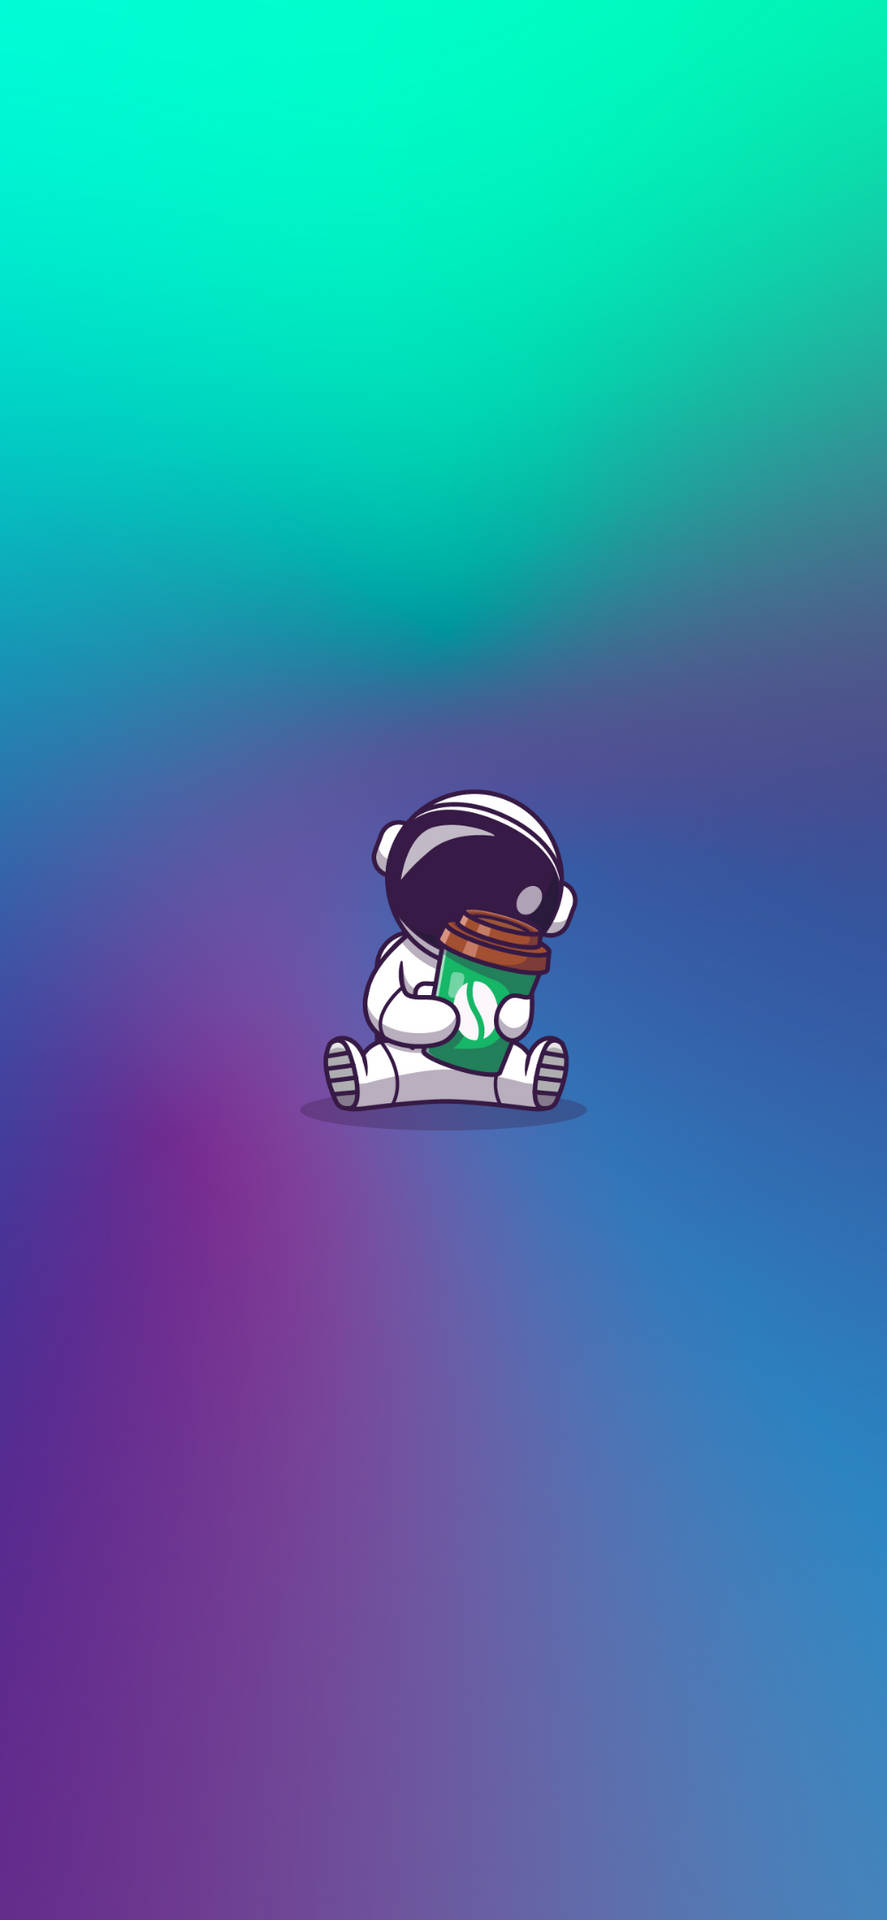 Cartoon Astronaut And Coffee Takeout Background